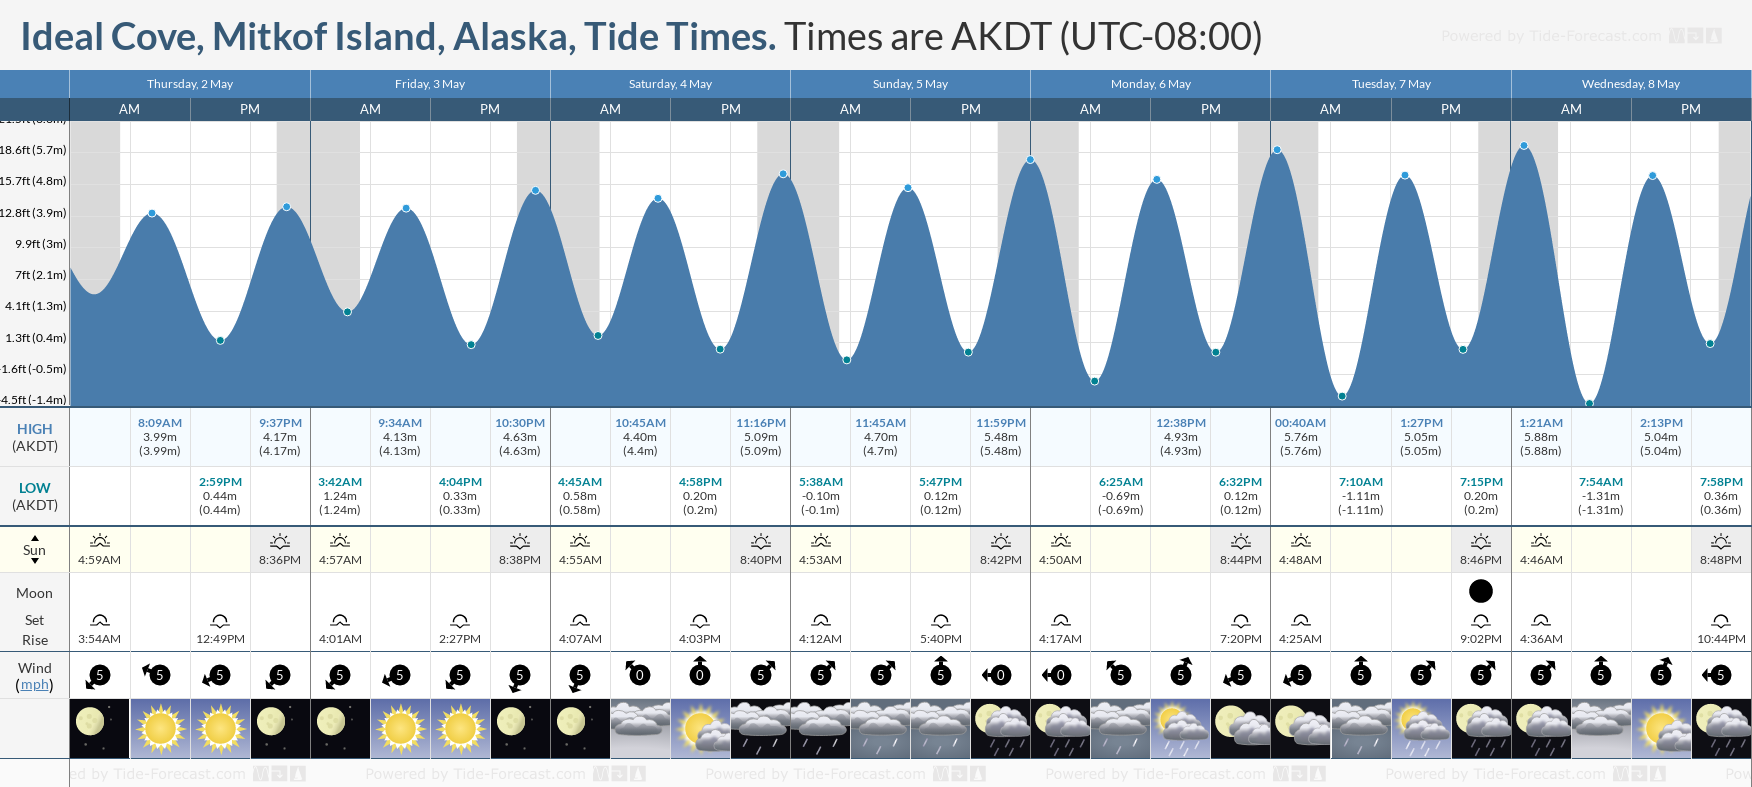 Ideal Cove, Mitkof Island, Alaska Tide Chart including high and low tide tide times for the next 7 days